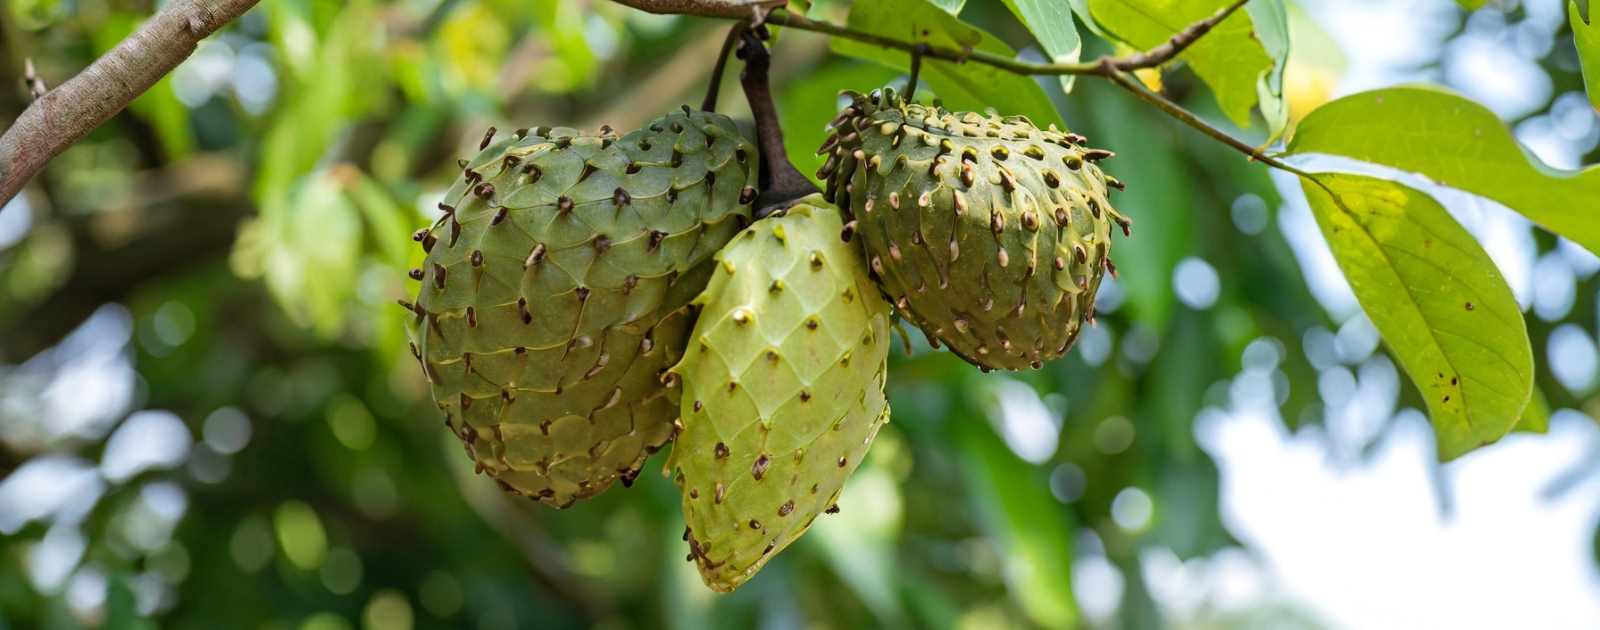 Why Is Soursop Illegal